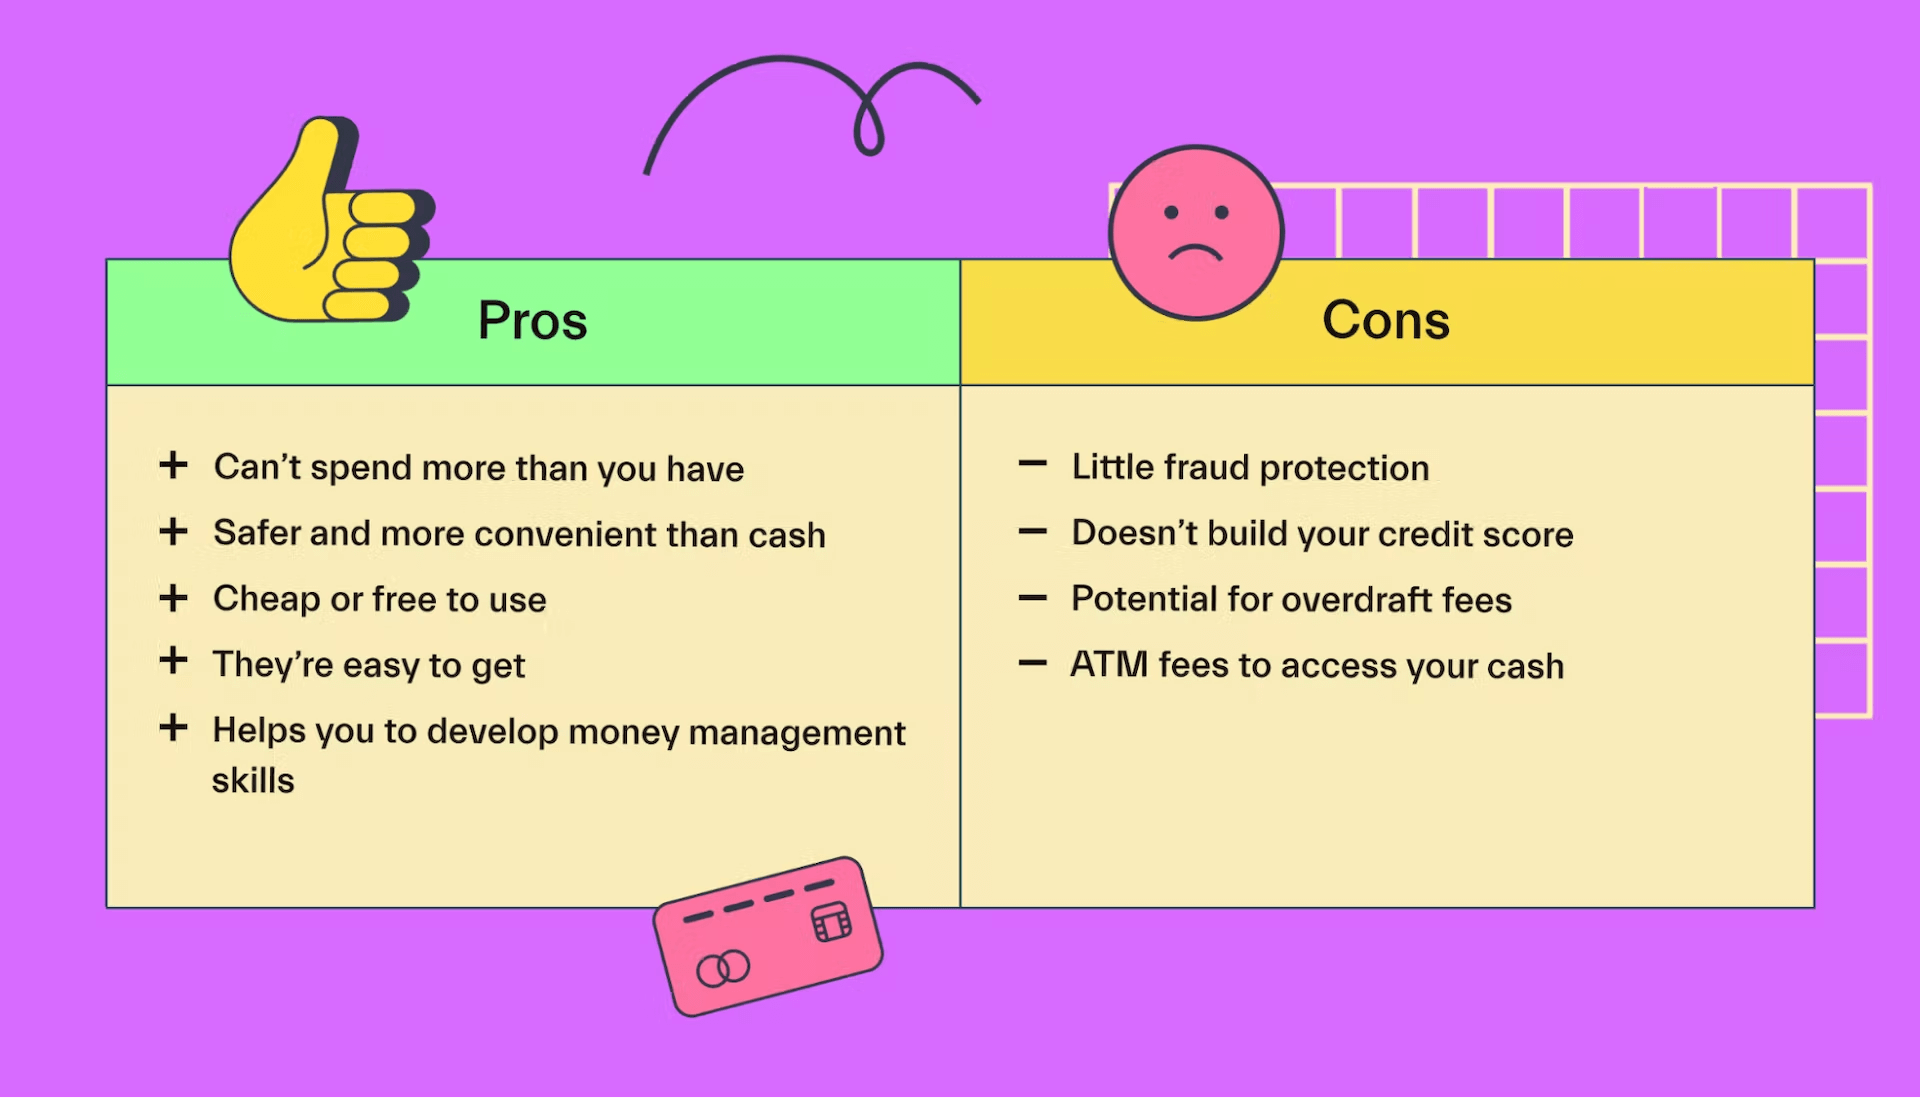 Pros and Cons of debit cards